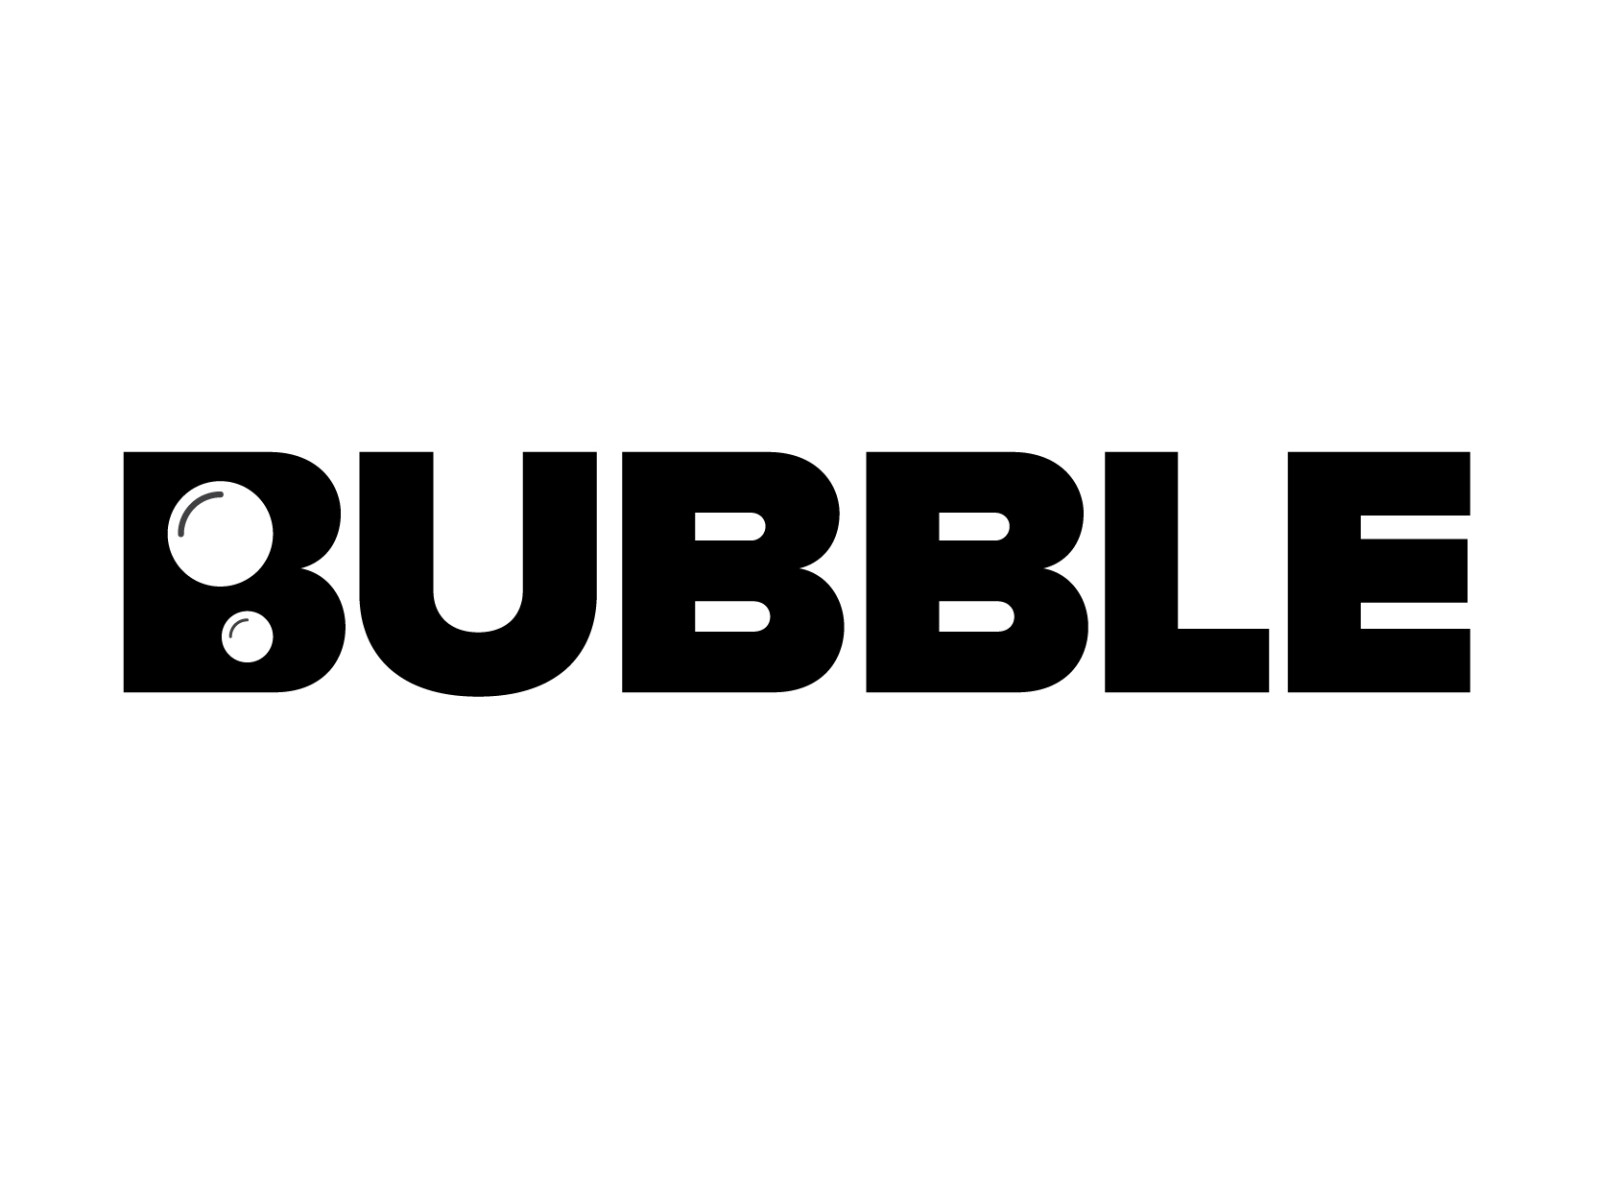 Bubble by Mike Camera on Dribbble